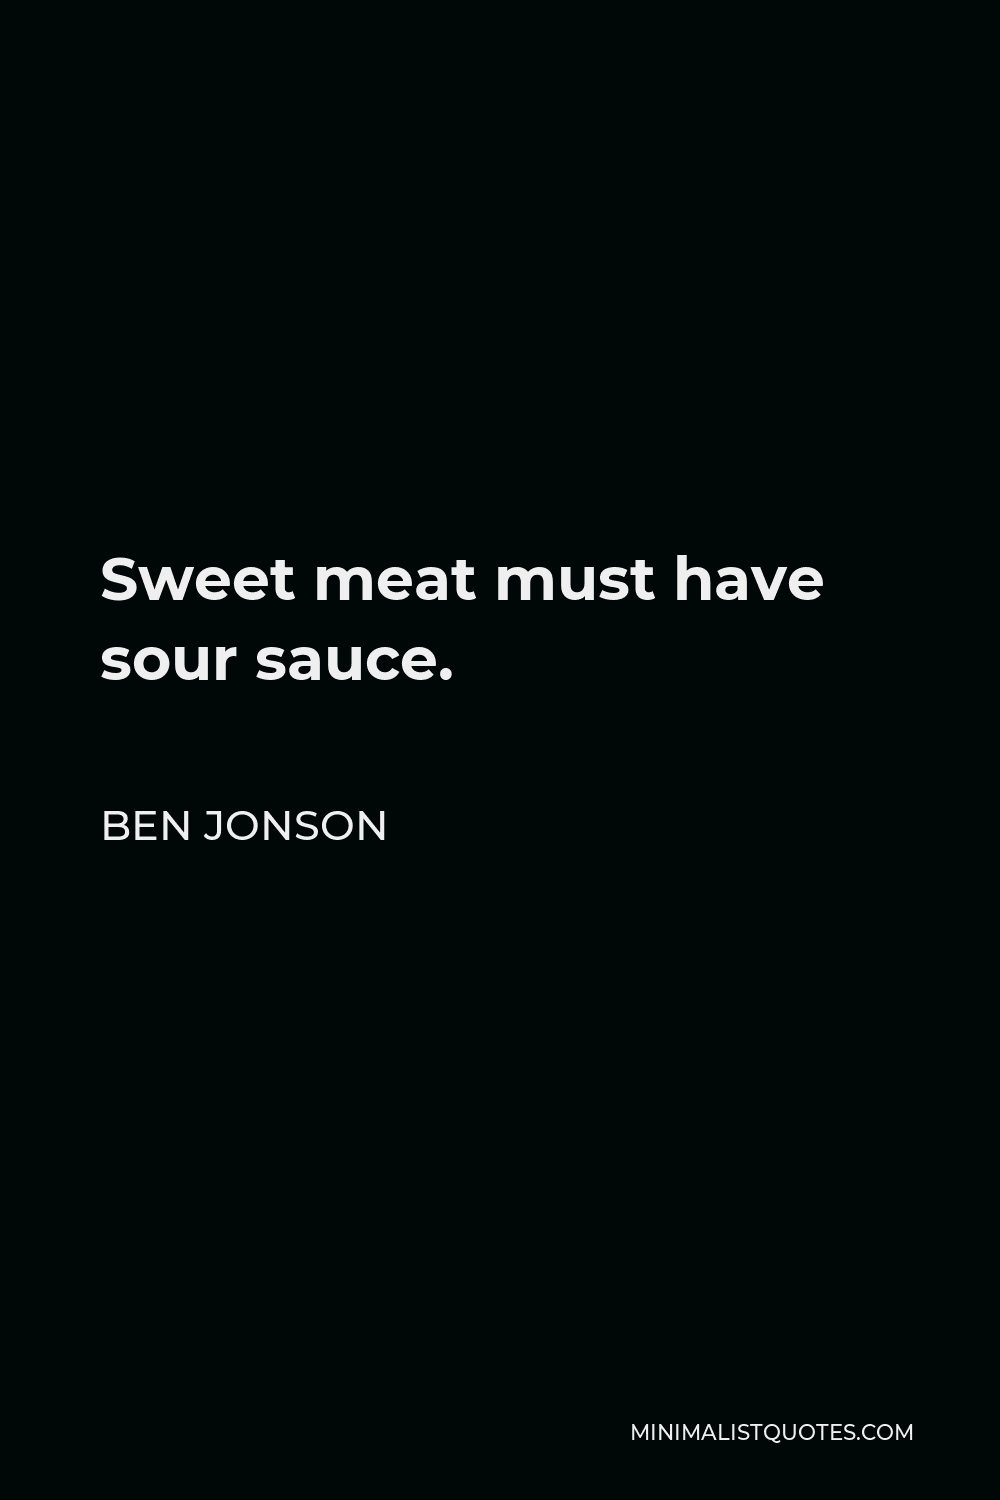 Ben Jonson Quote - Sweet meat must have sour sauce.